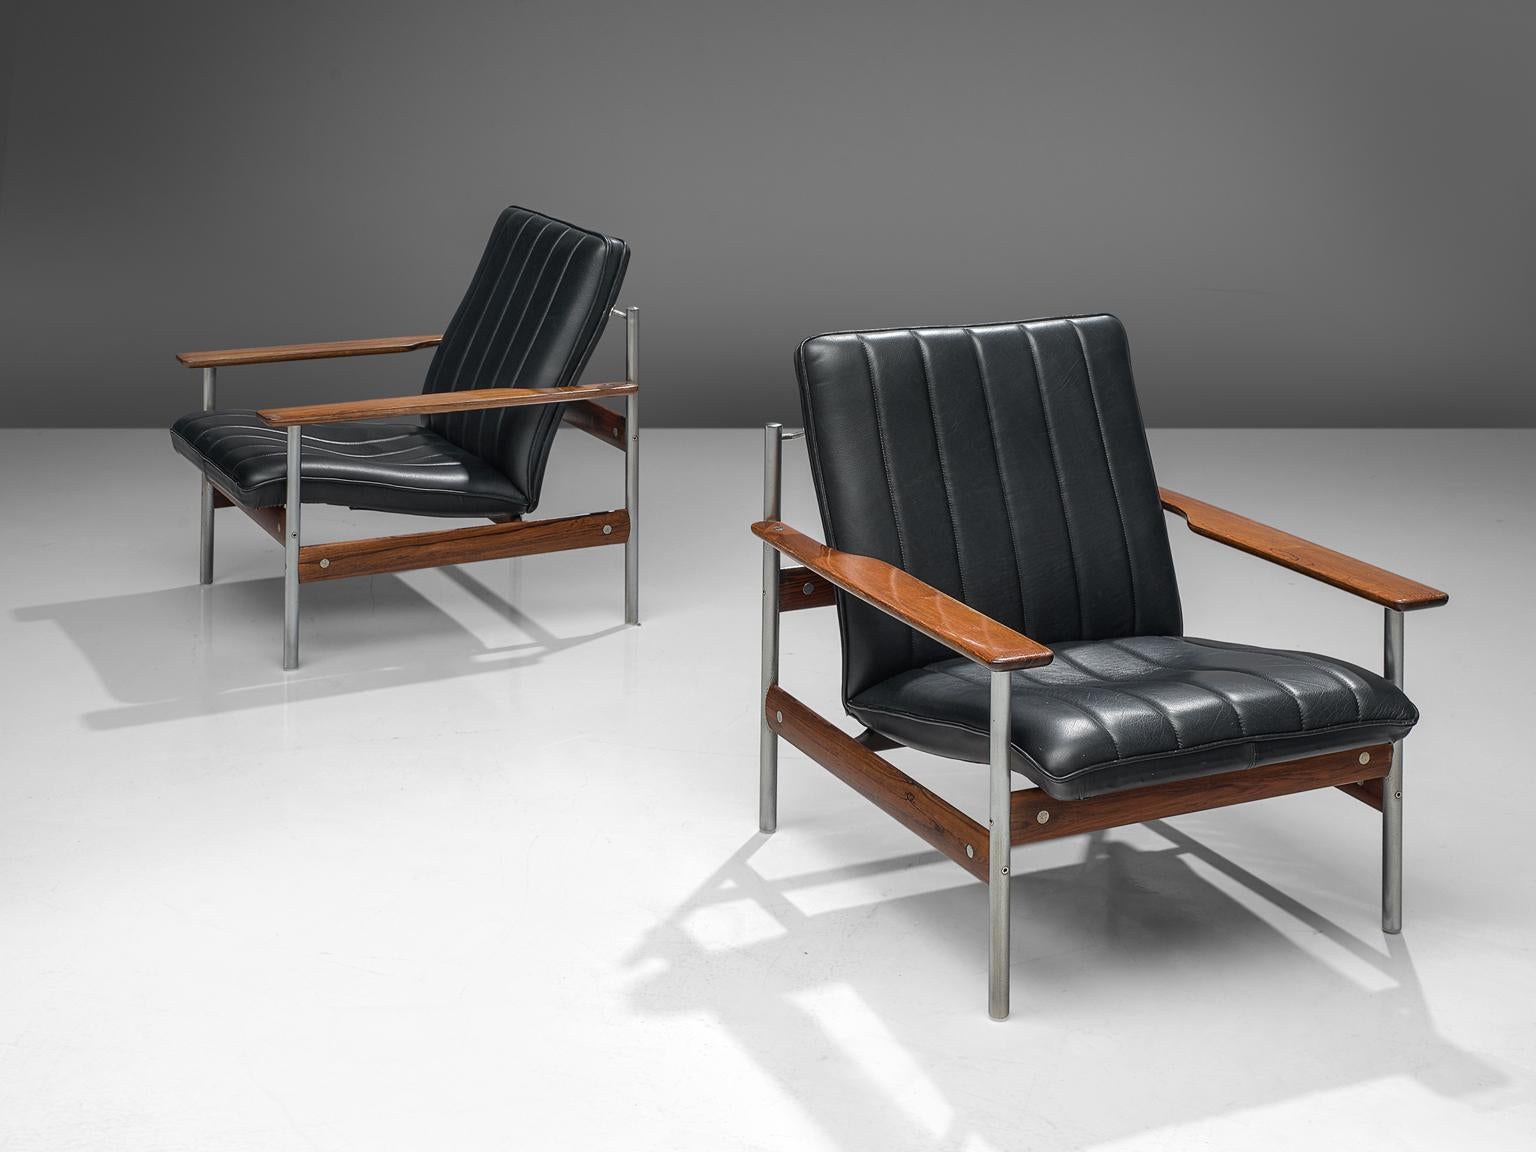 Sven Ivar Dysthe for Dokke Møbler, leather, rosewood, steel, Norway, 1959. 

This set of lounge chairs is designed by Sven Ivar Dysthe for Dokke Møbler. The frame of these armchairs is made out of rosewood and the legs are made out of stainless